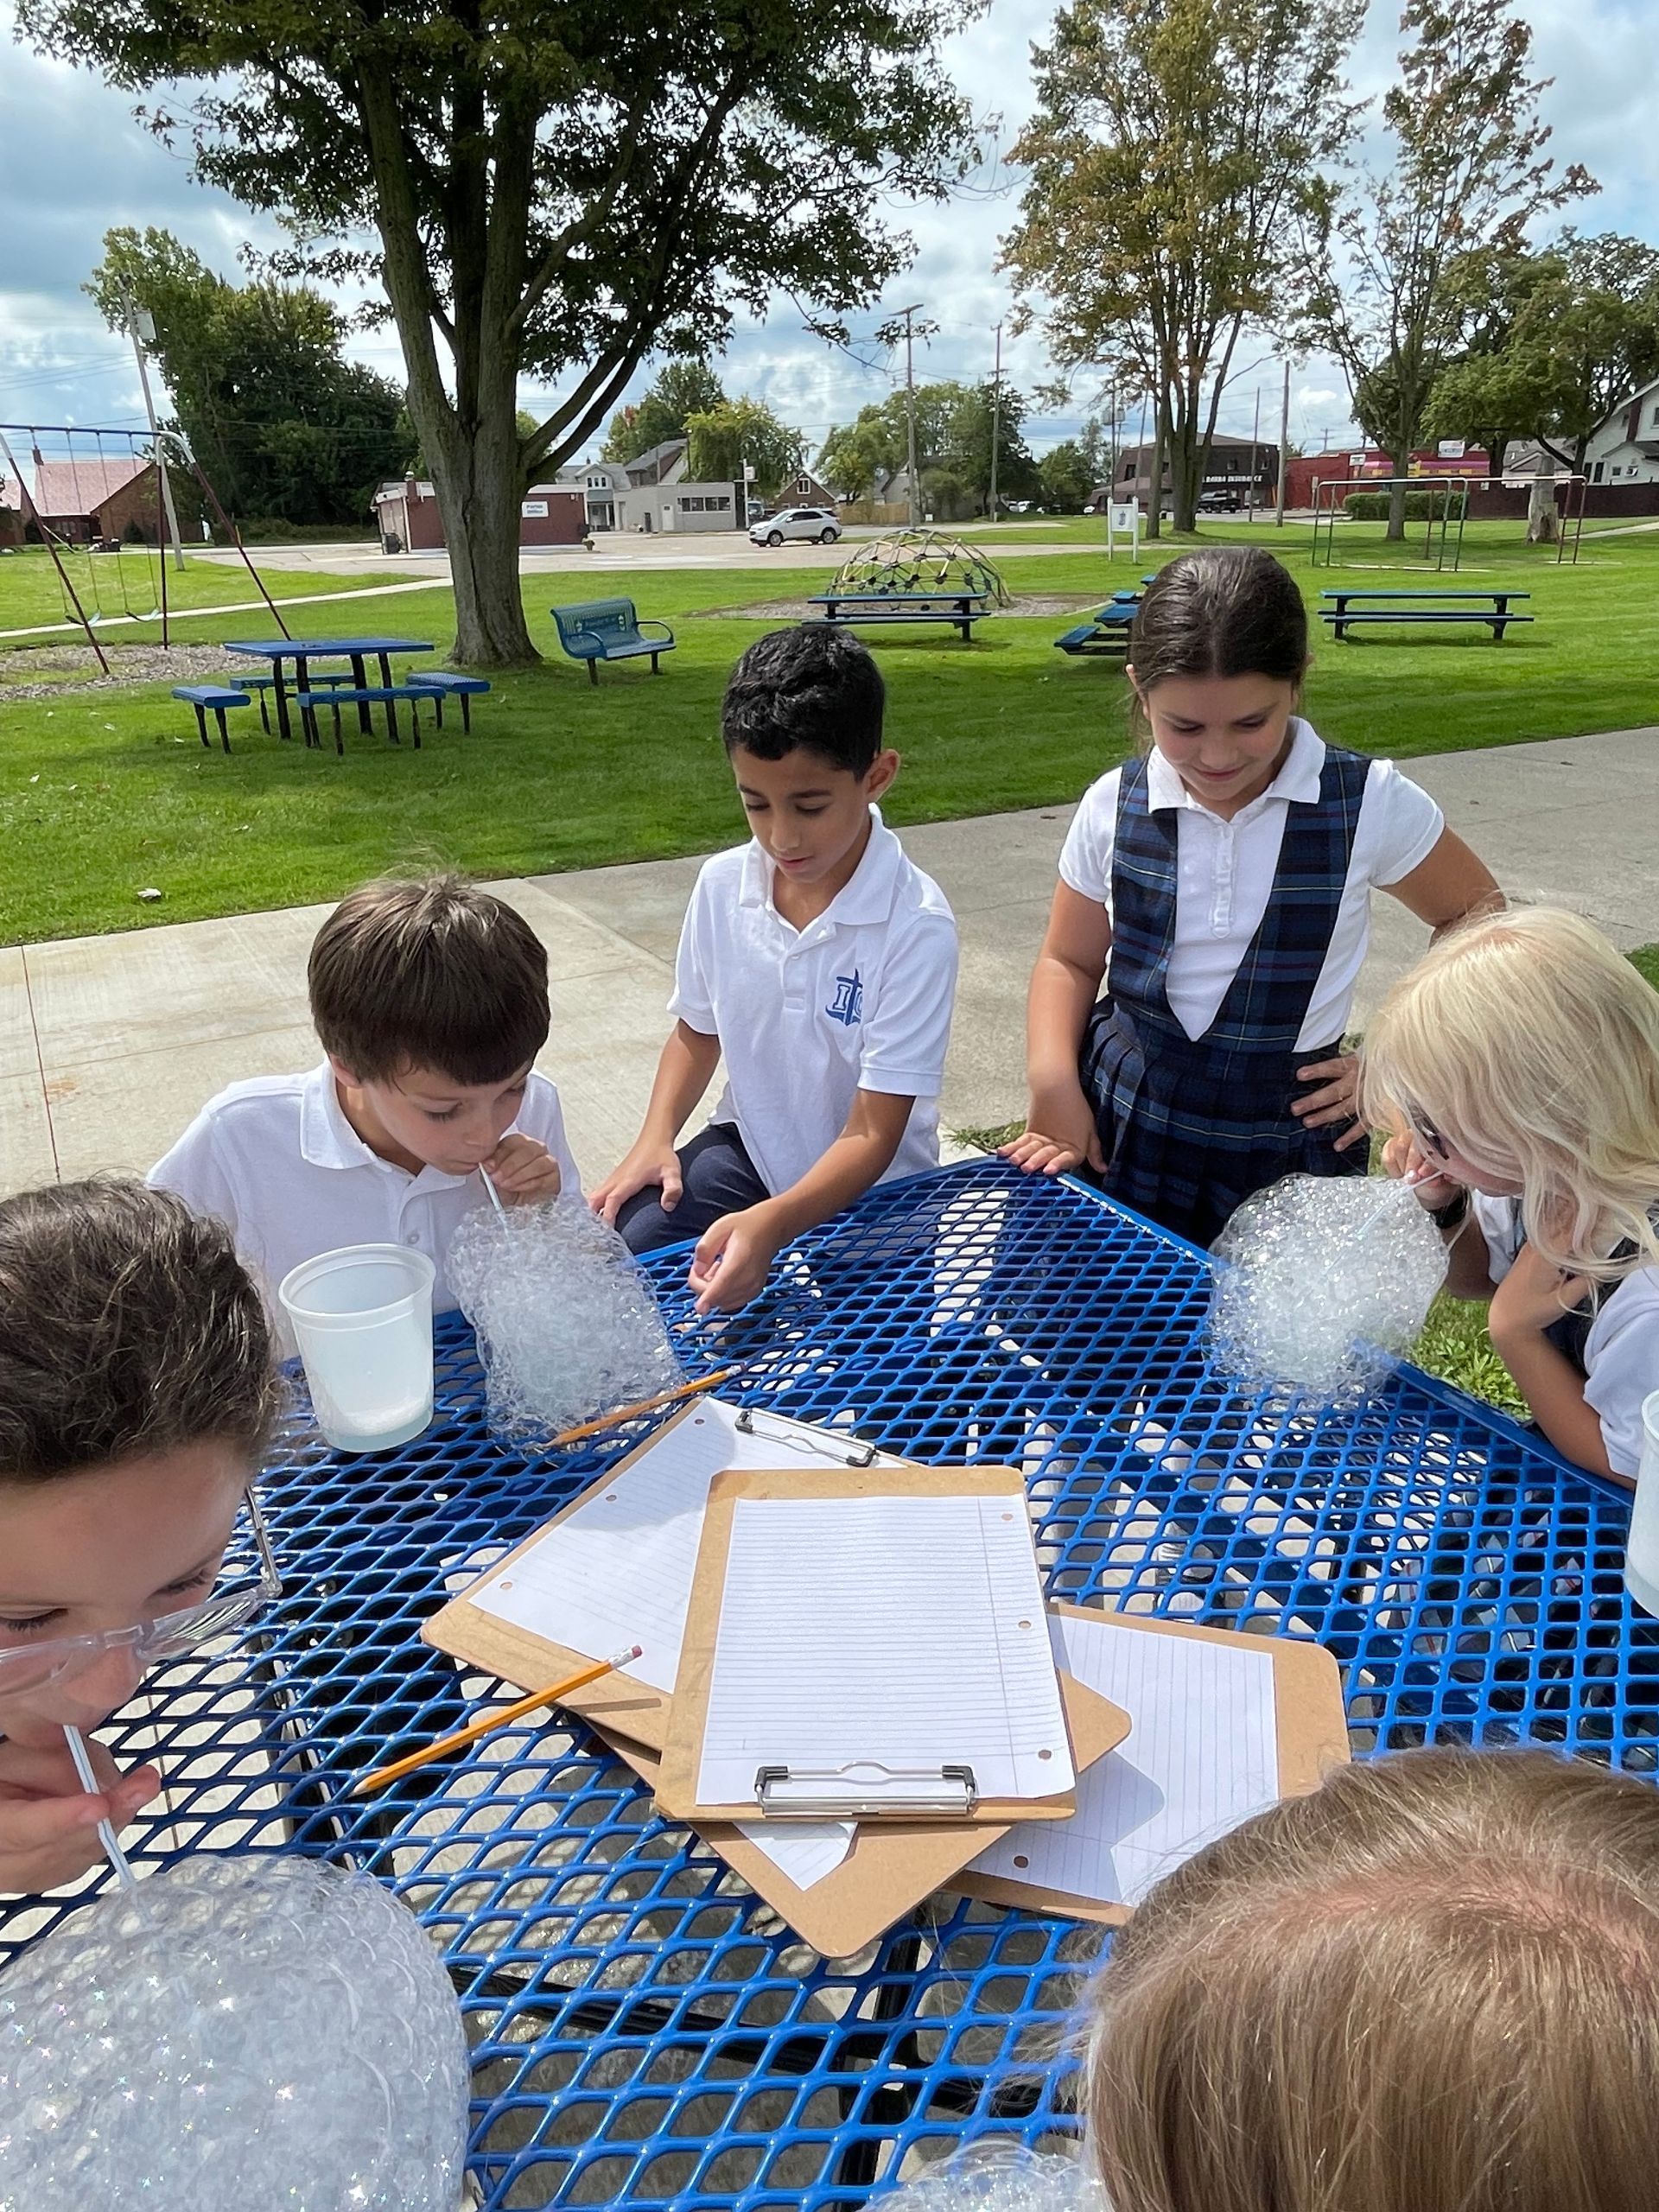 A group of children are sitting at a blue picnic table blowing bubbles.